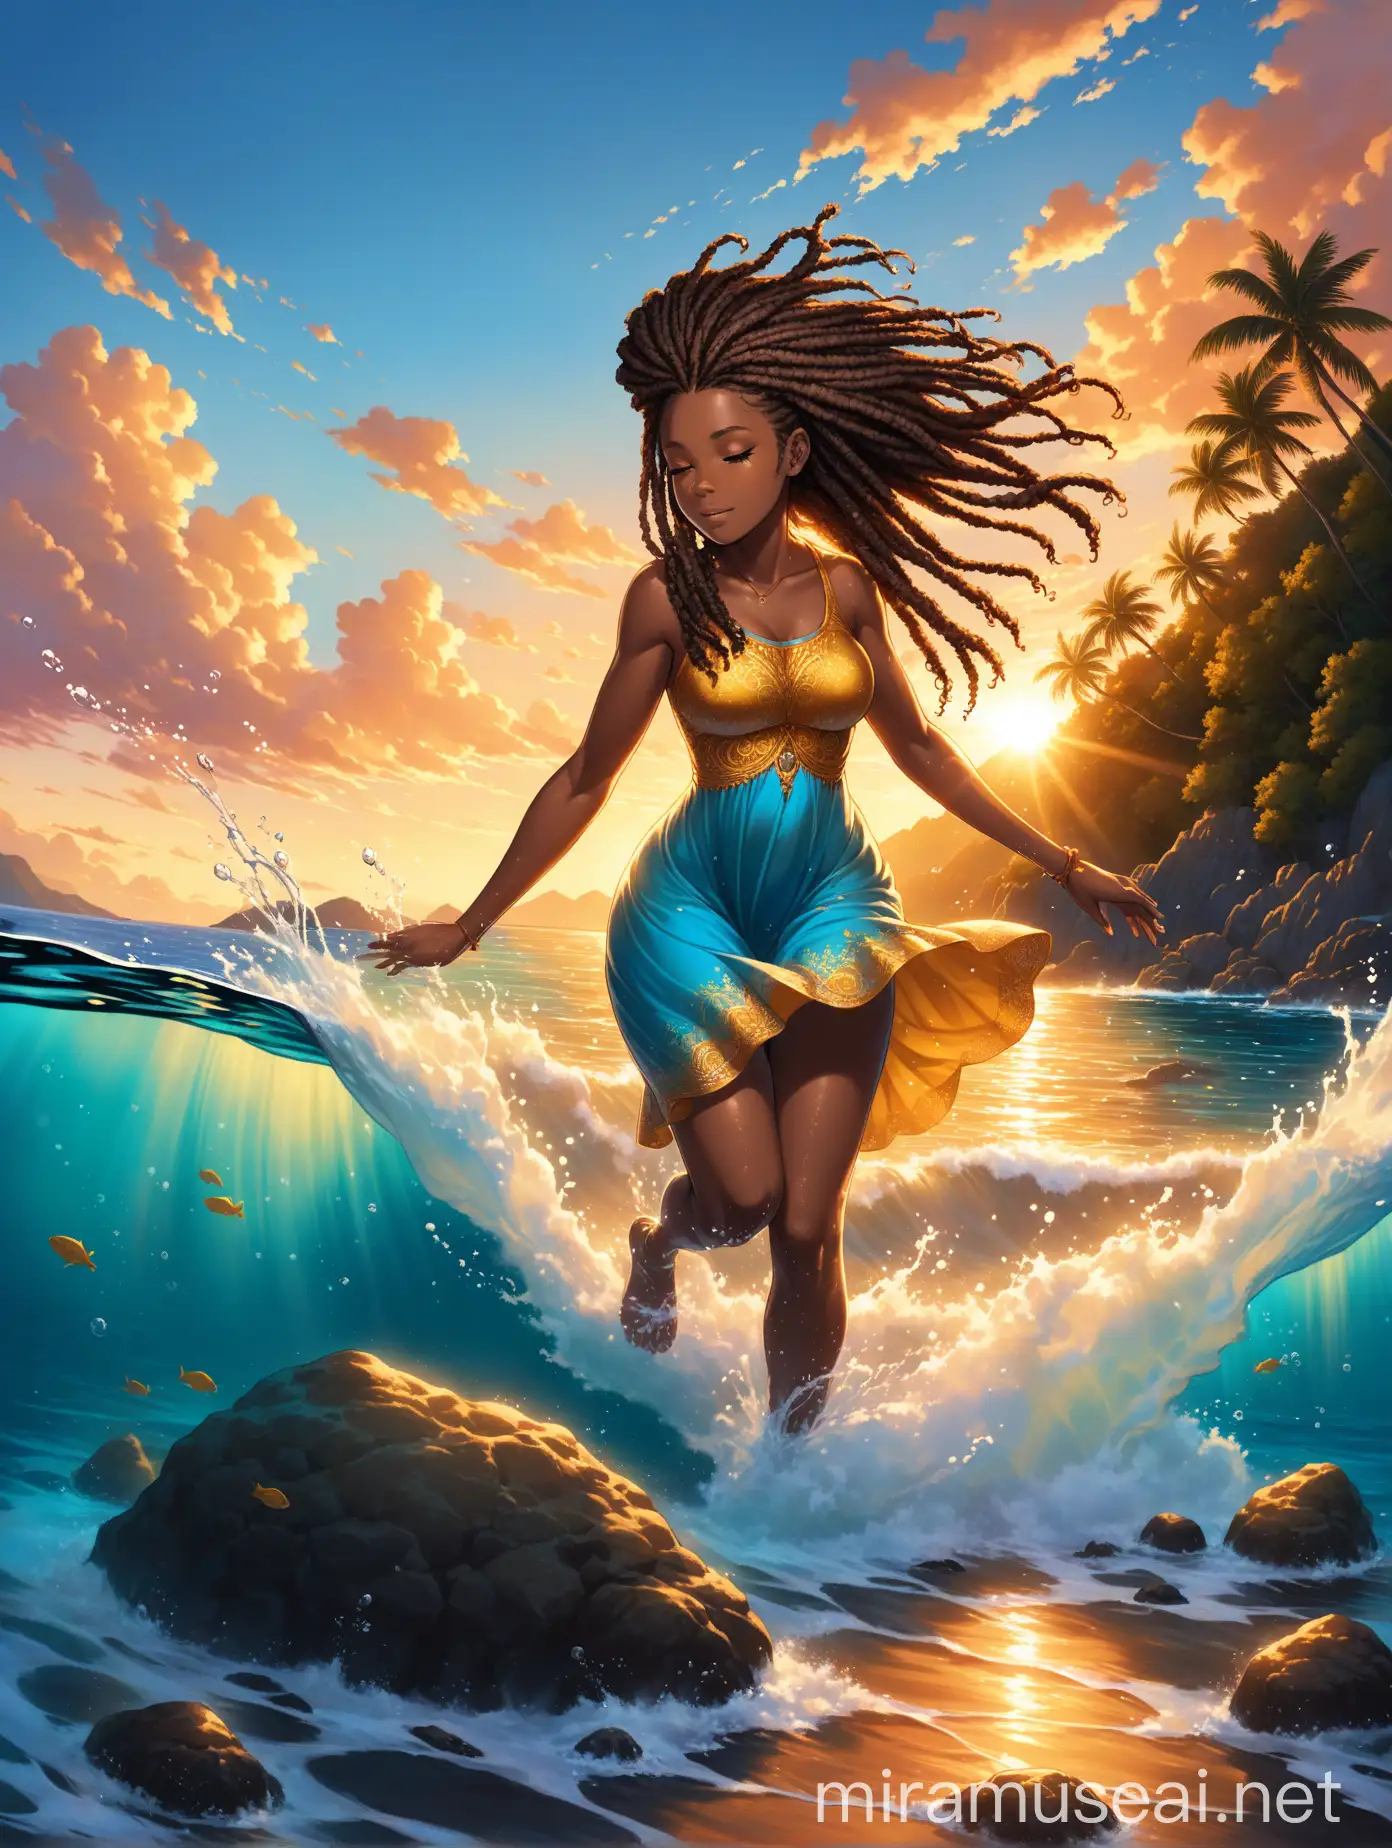 Serene Sunset Portrait Elegant Black Woman in Blue and Gold Dress by the Seaside